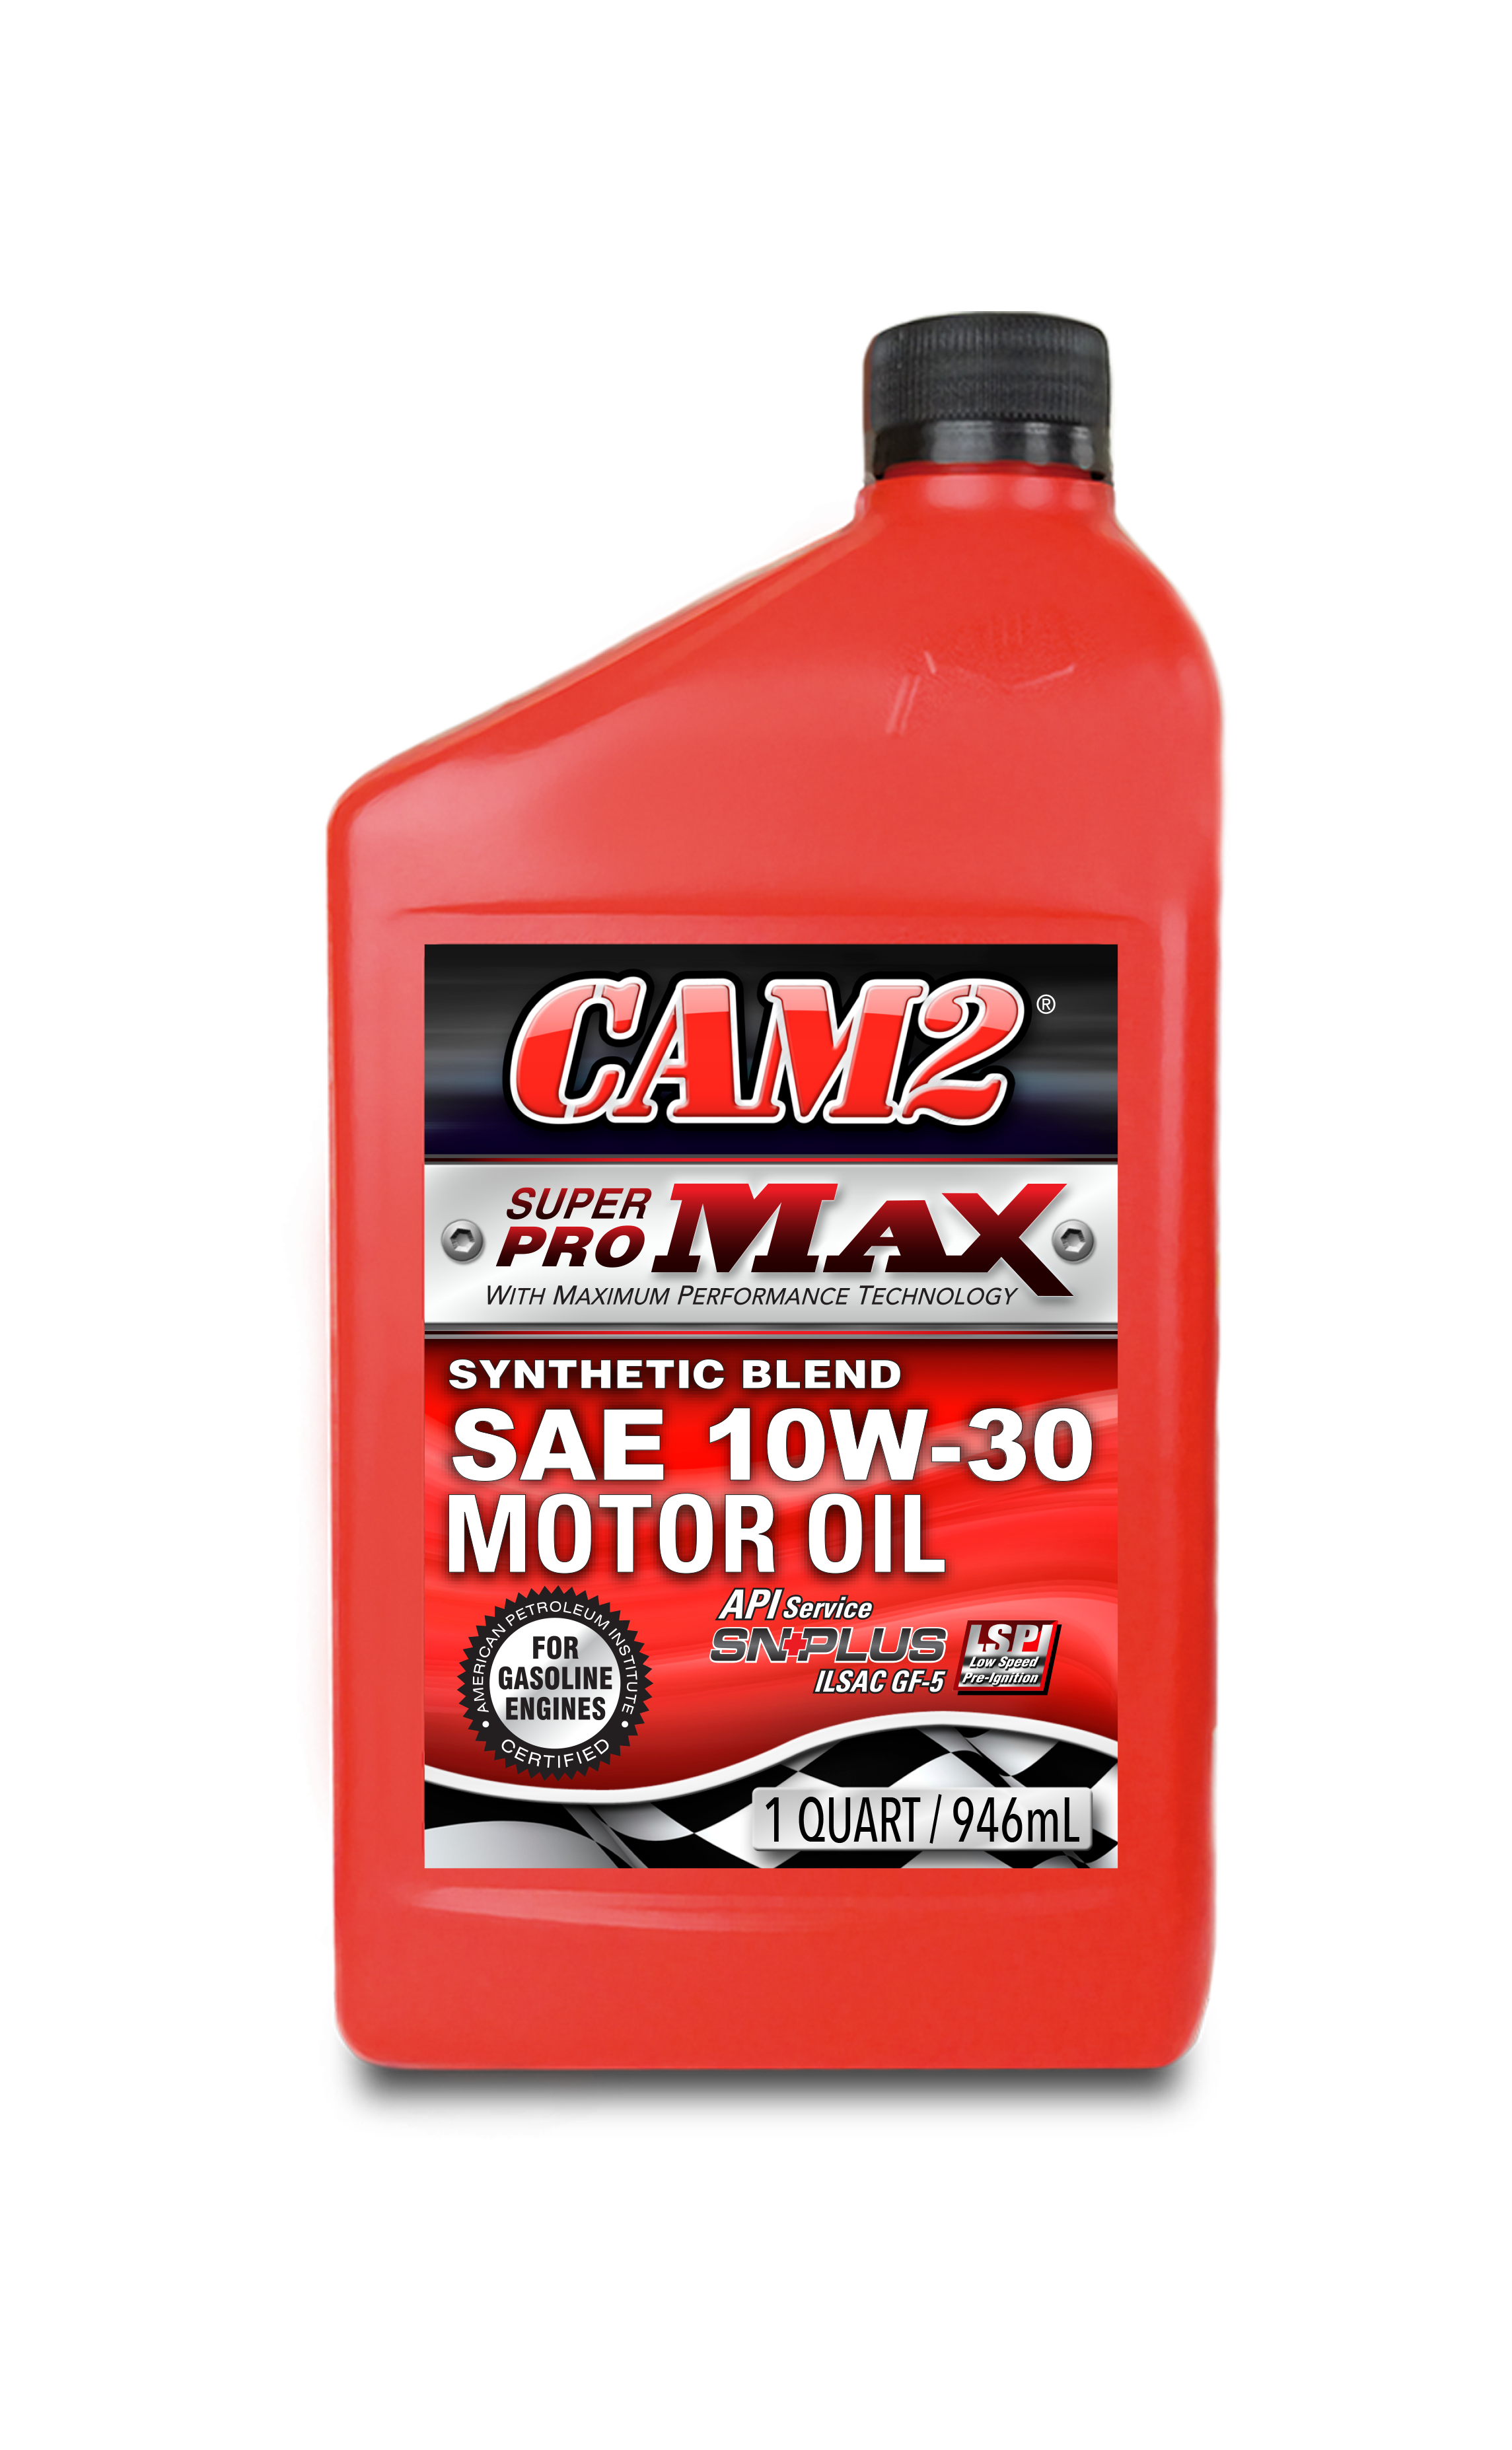 CAM2 SUPERPRO MAX 10W-30 SYNTHETIC BLEND MOTOR OIL 80565-414